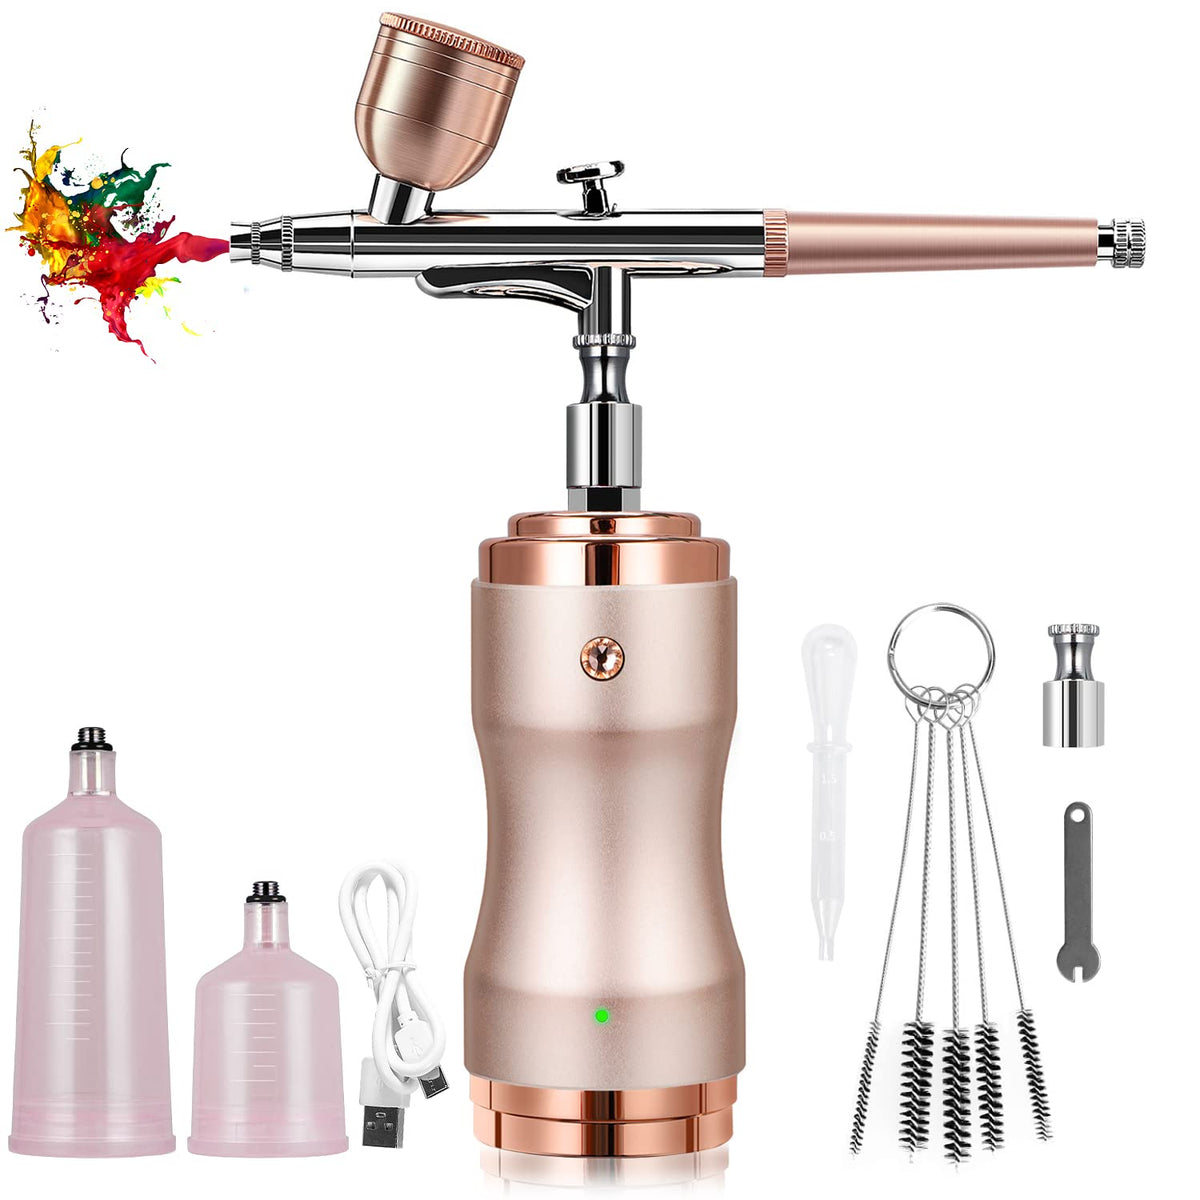 Cordless Airbrush Kit Upgraded Rechargeable Airbrush Compressor 30 PSI for Art Painting, Cake Airbrush Decorating, Crafts, Model Painting, Air Brush